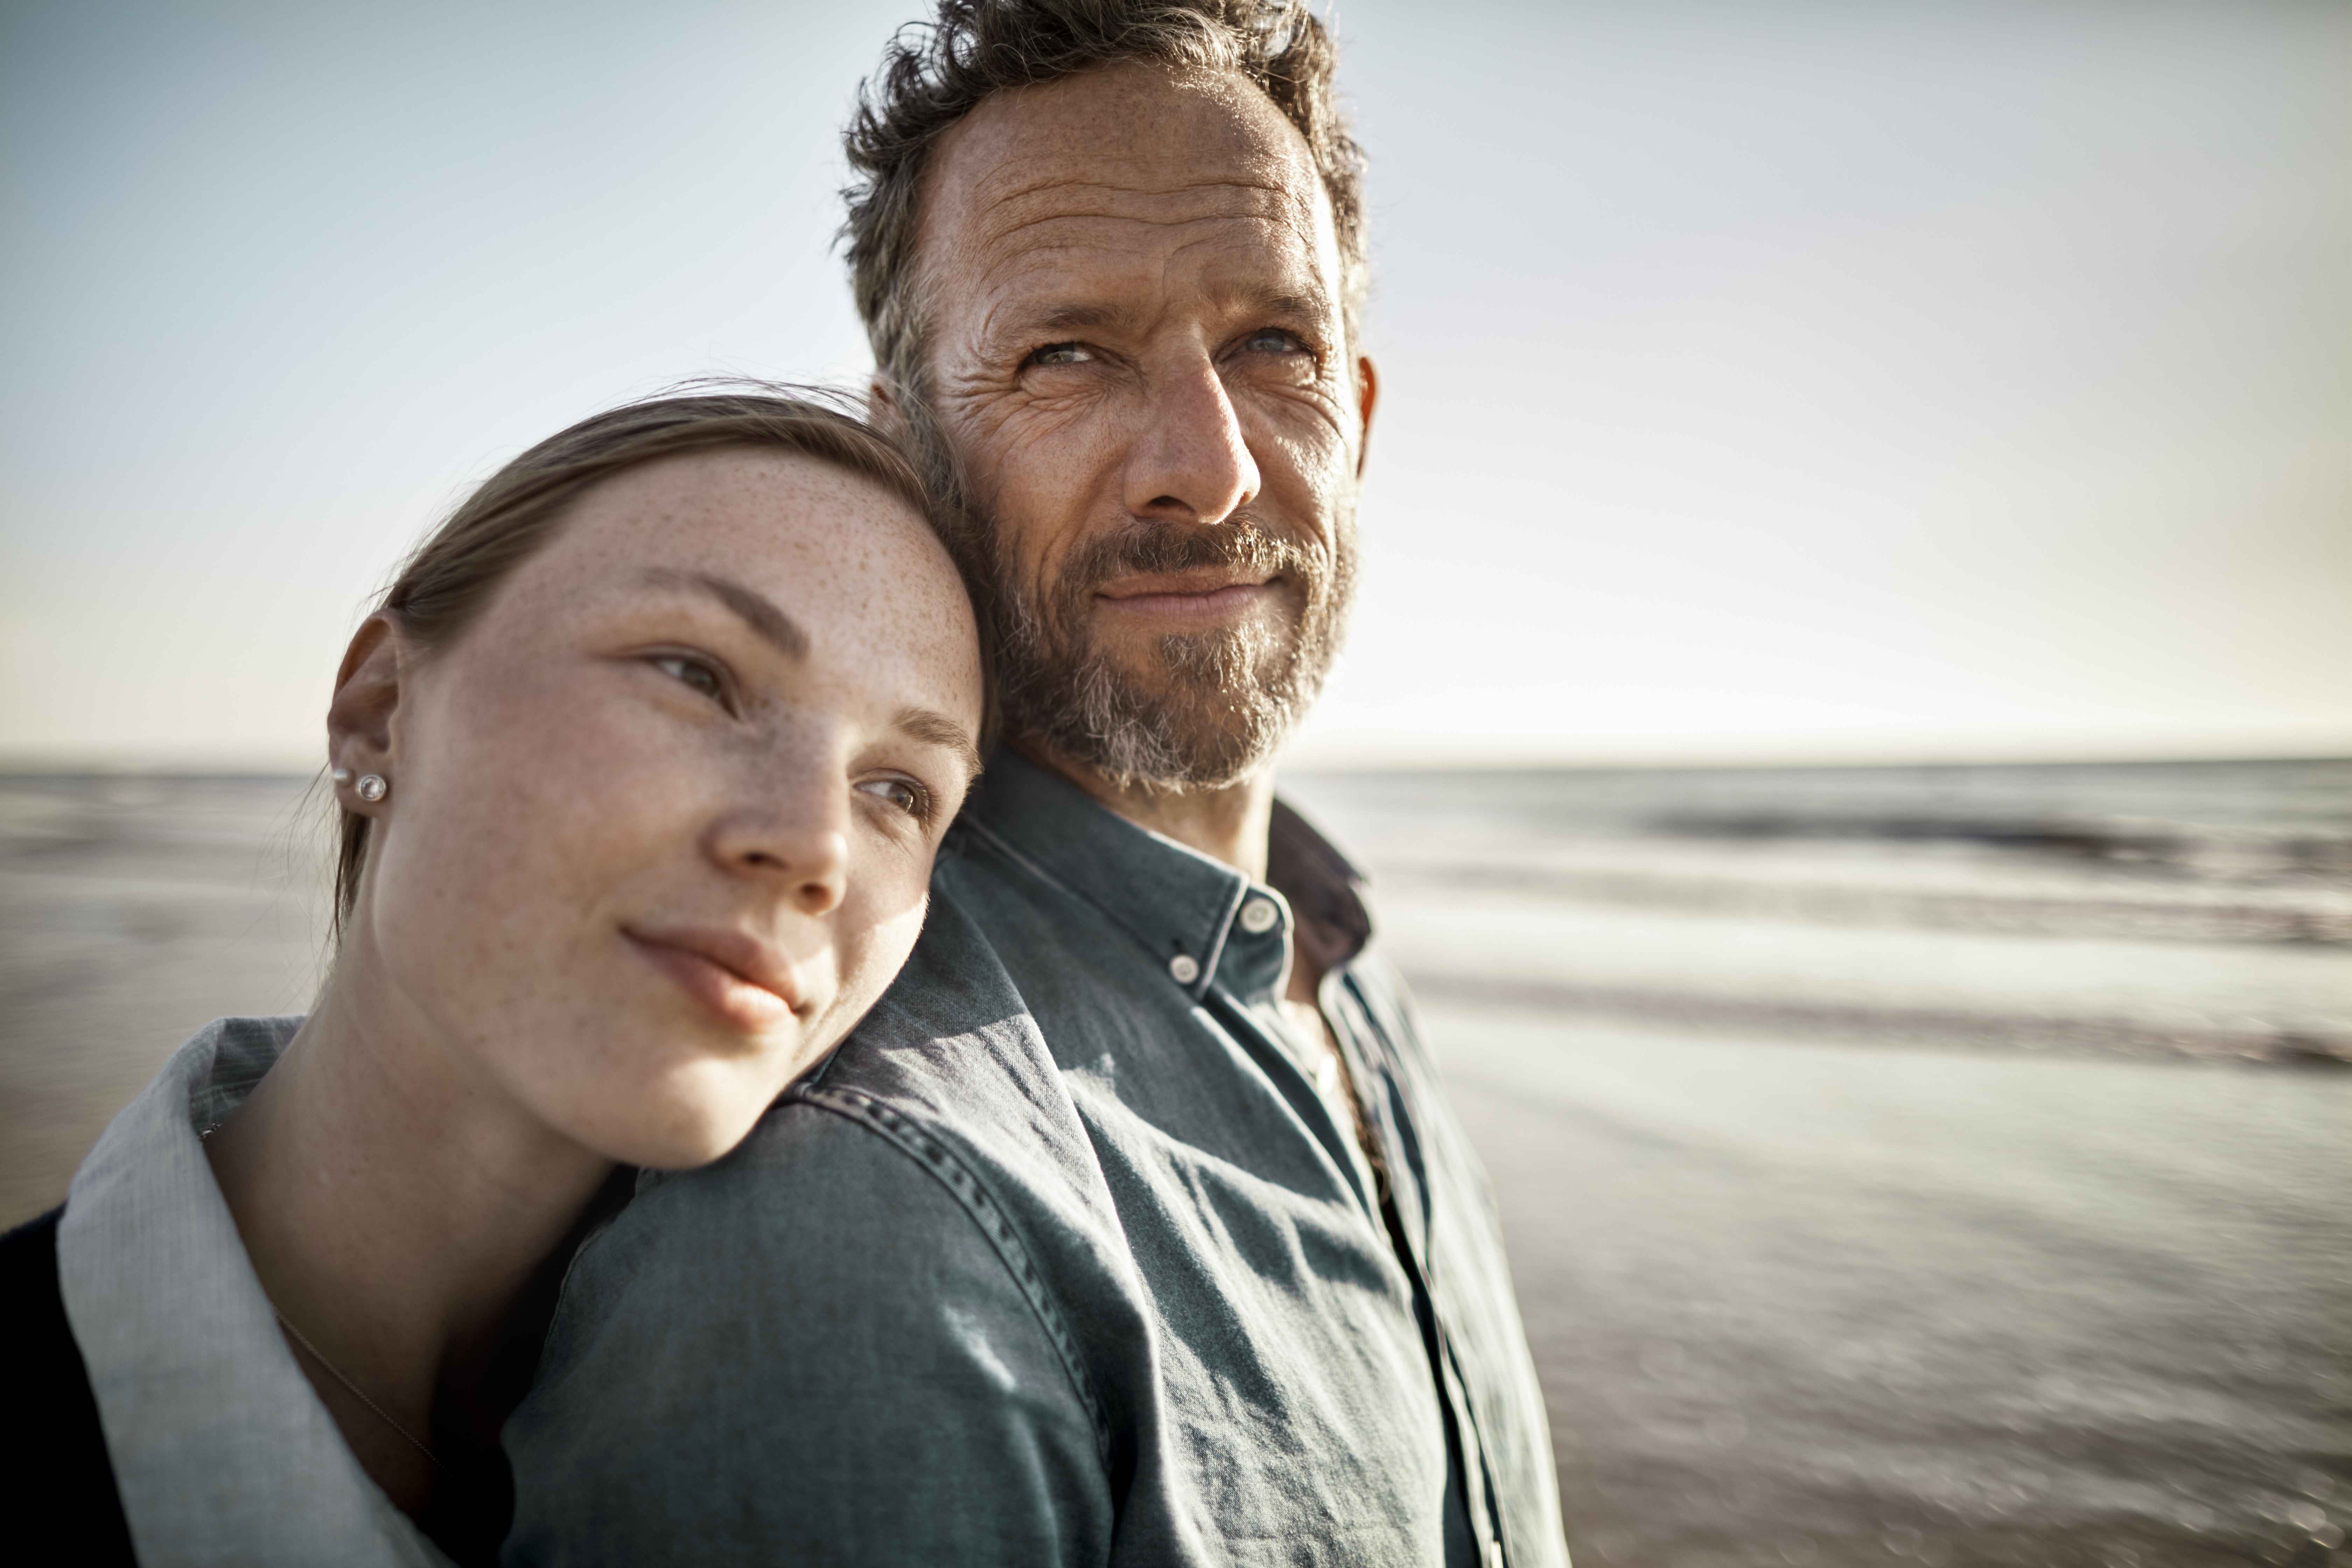 Portrait of man and young woman by the sea | Source: Getty Images